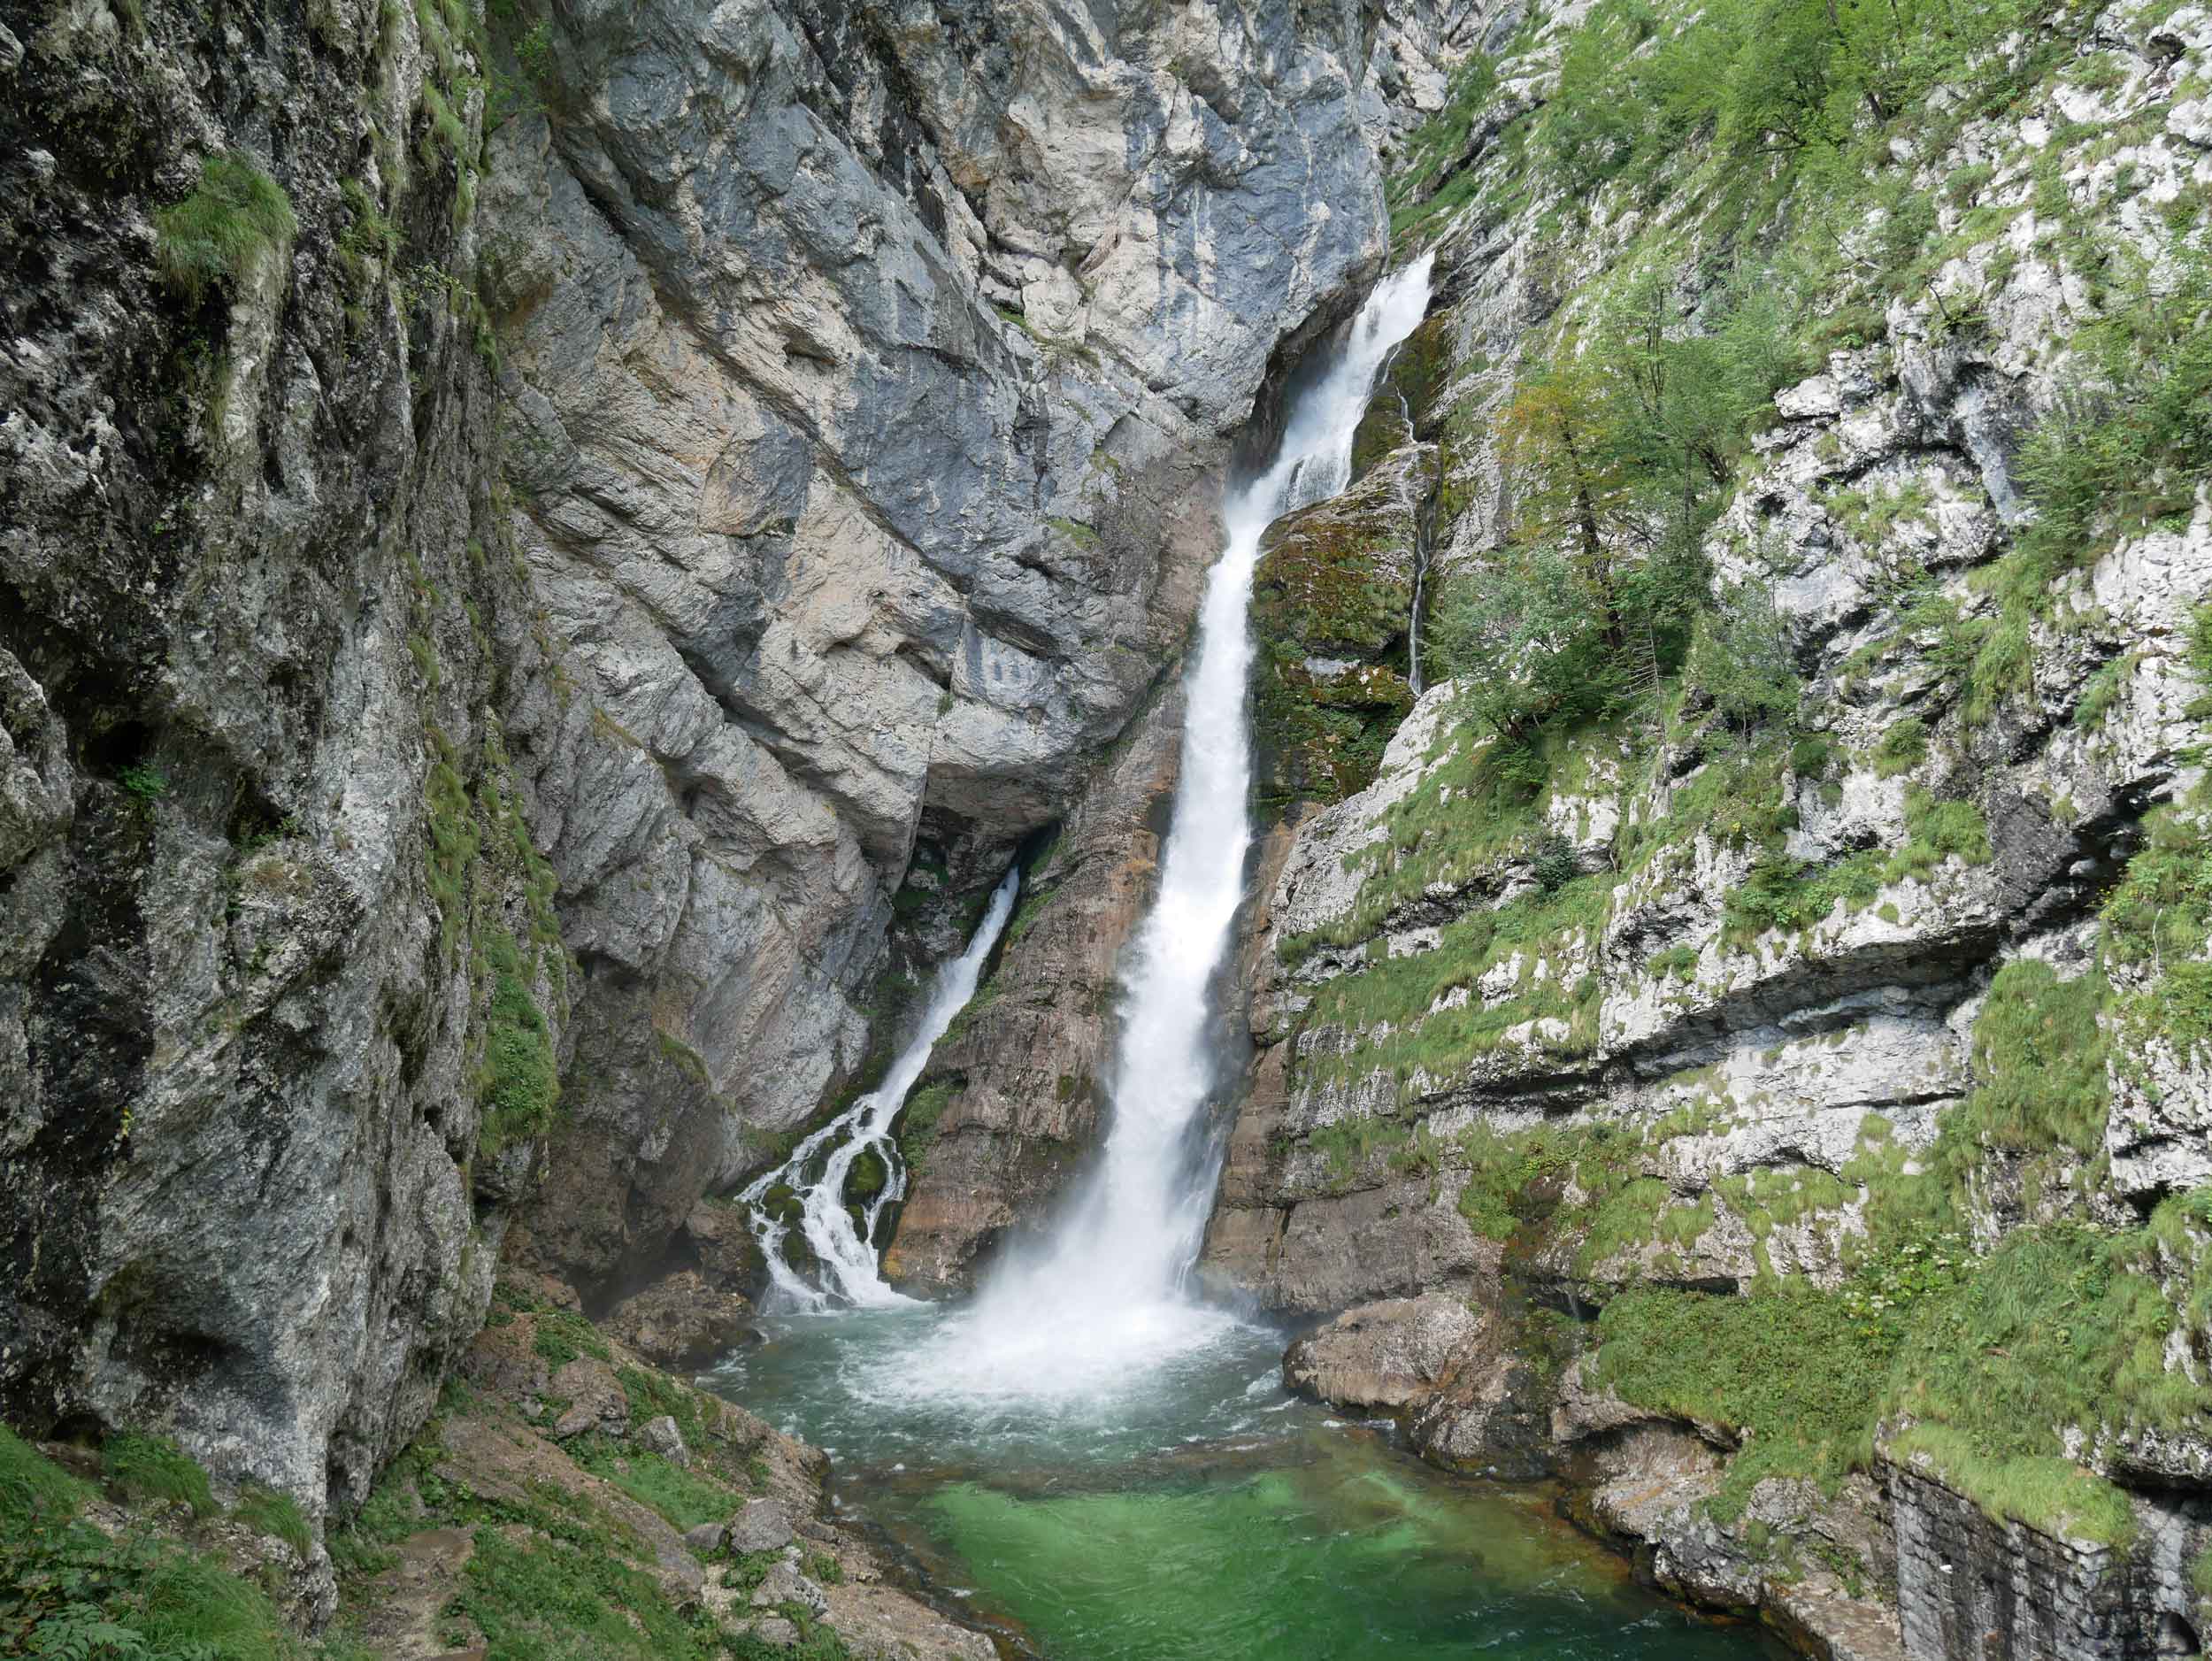  Nearby, we hiked up to Savica Waterfall, which cuts a deep gorge and feeds the headwaters of Sava Bohinjka. 